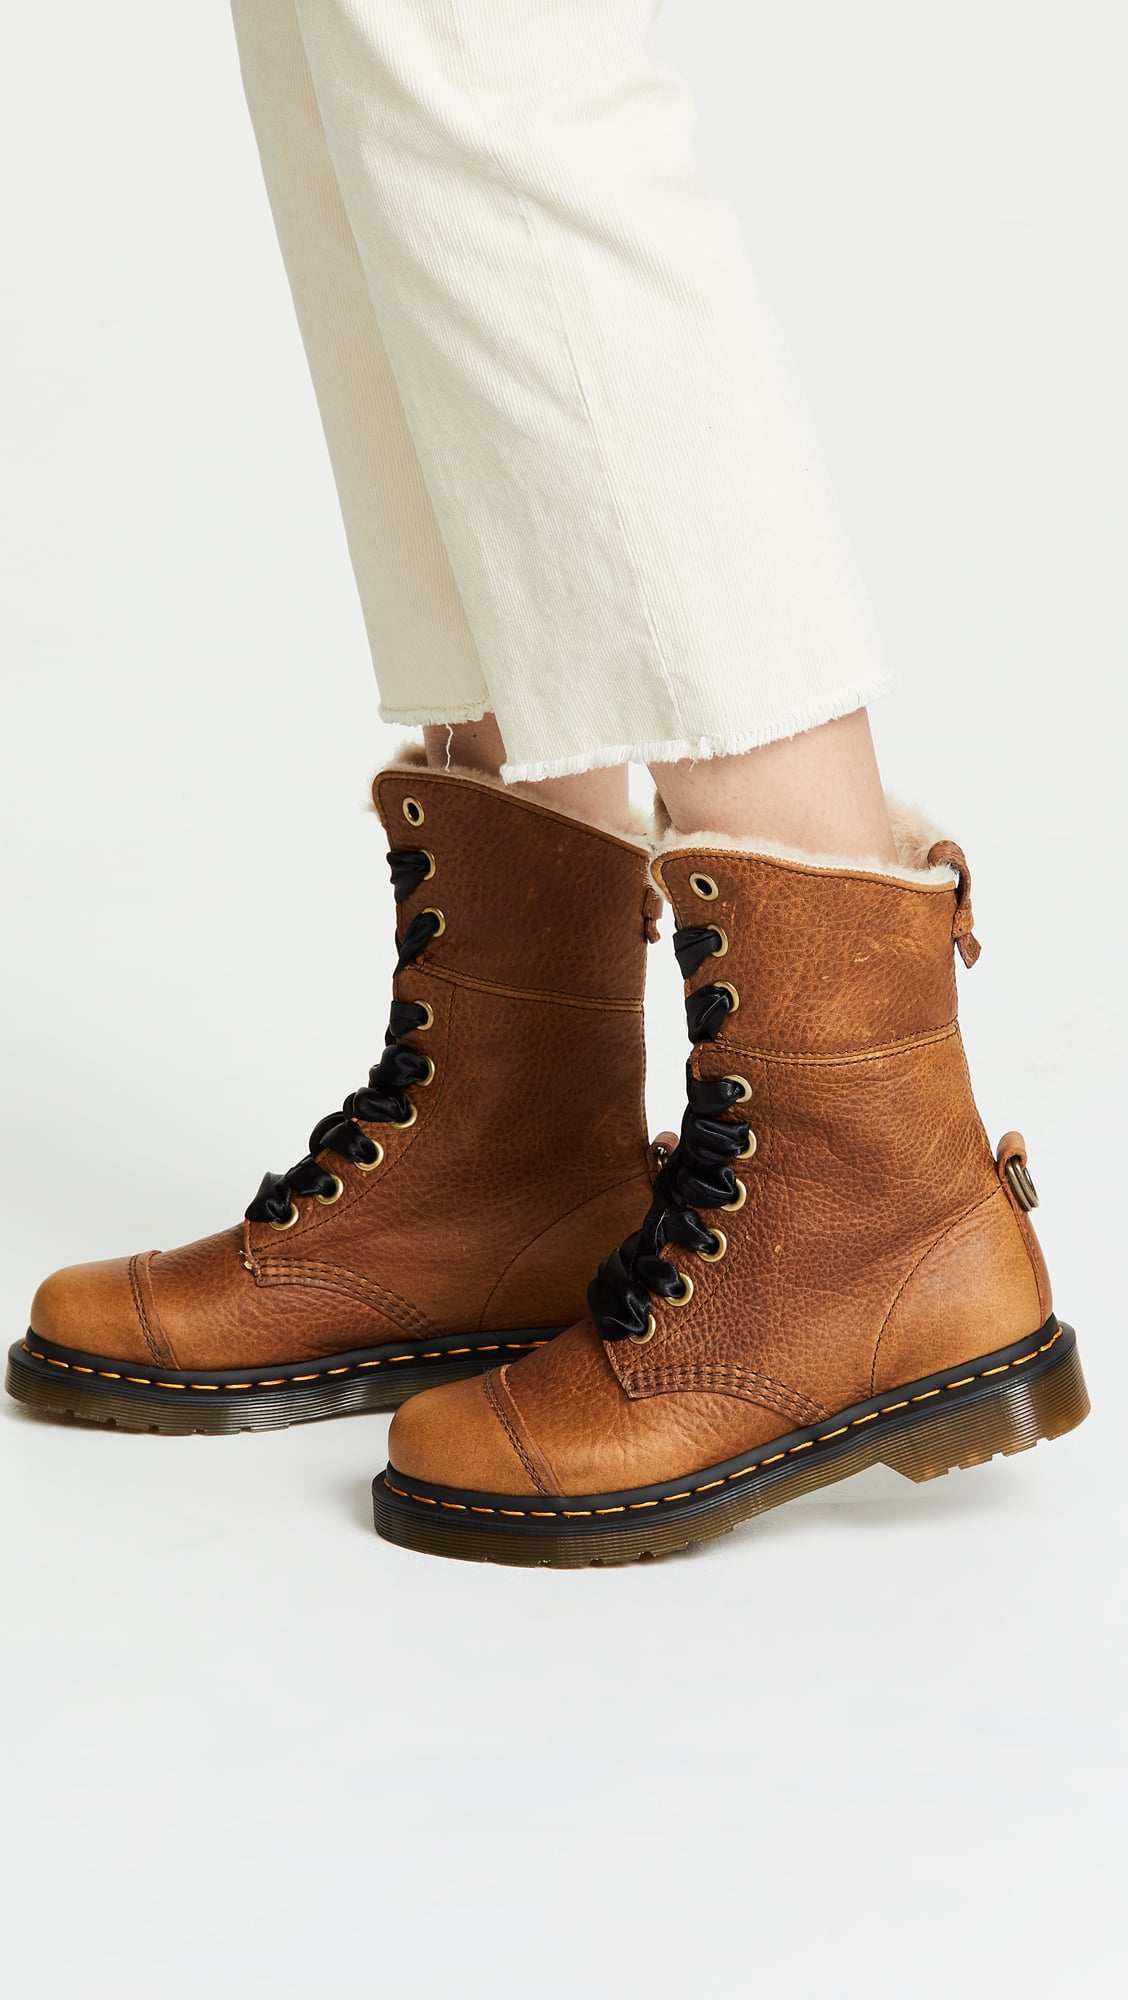 Dr. Martens Aimilita FL 9 Boot | Start Walking — These 12 Comfortable Boots Will Keep You on Your Toes | POPSUGAR Fashion Photo 4